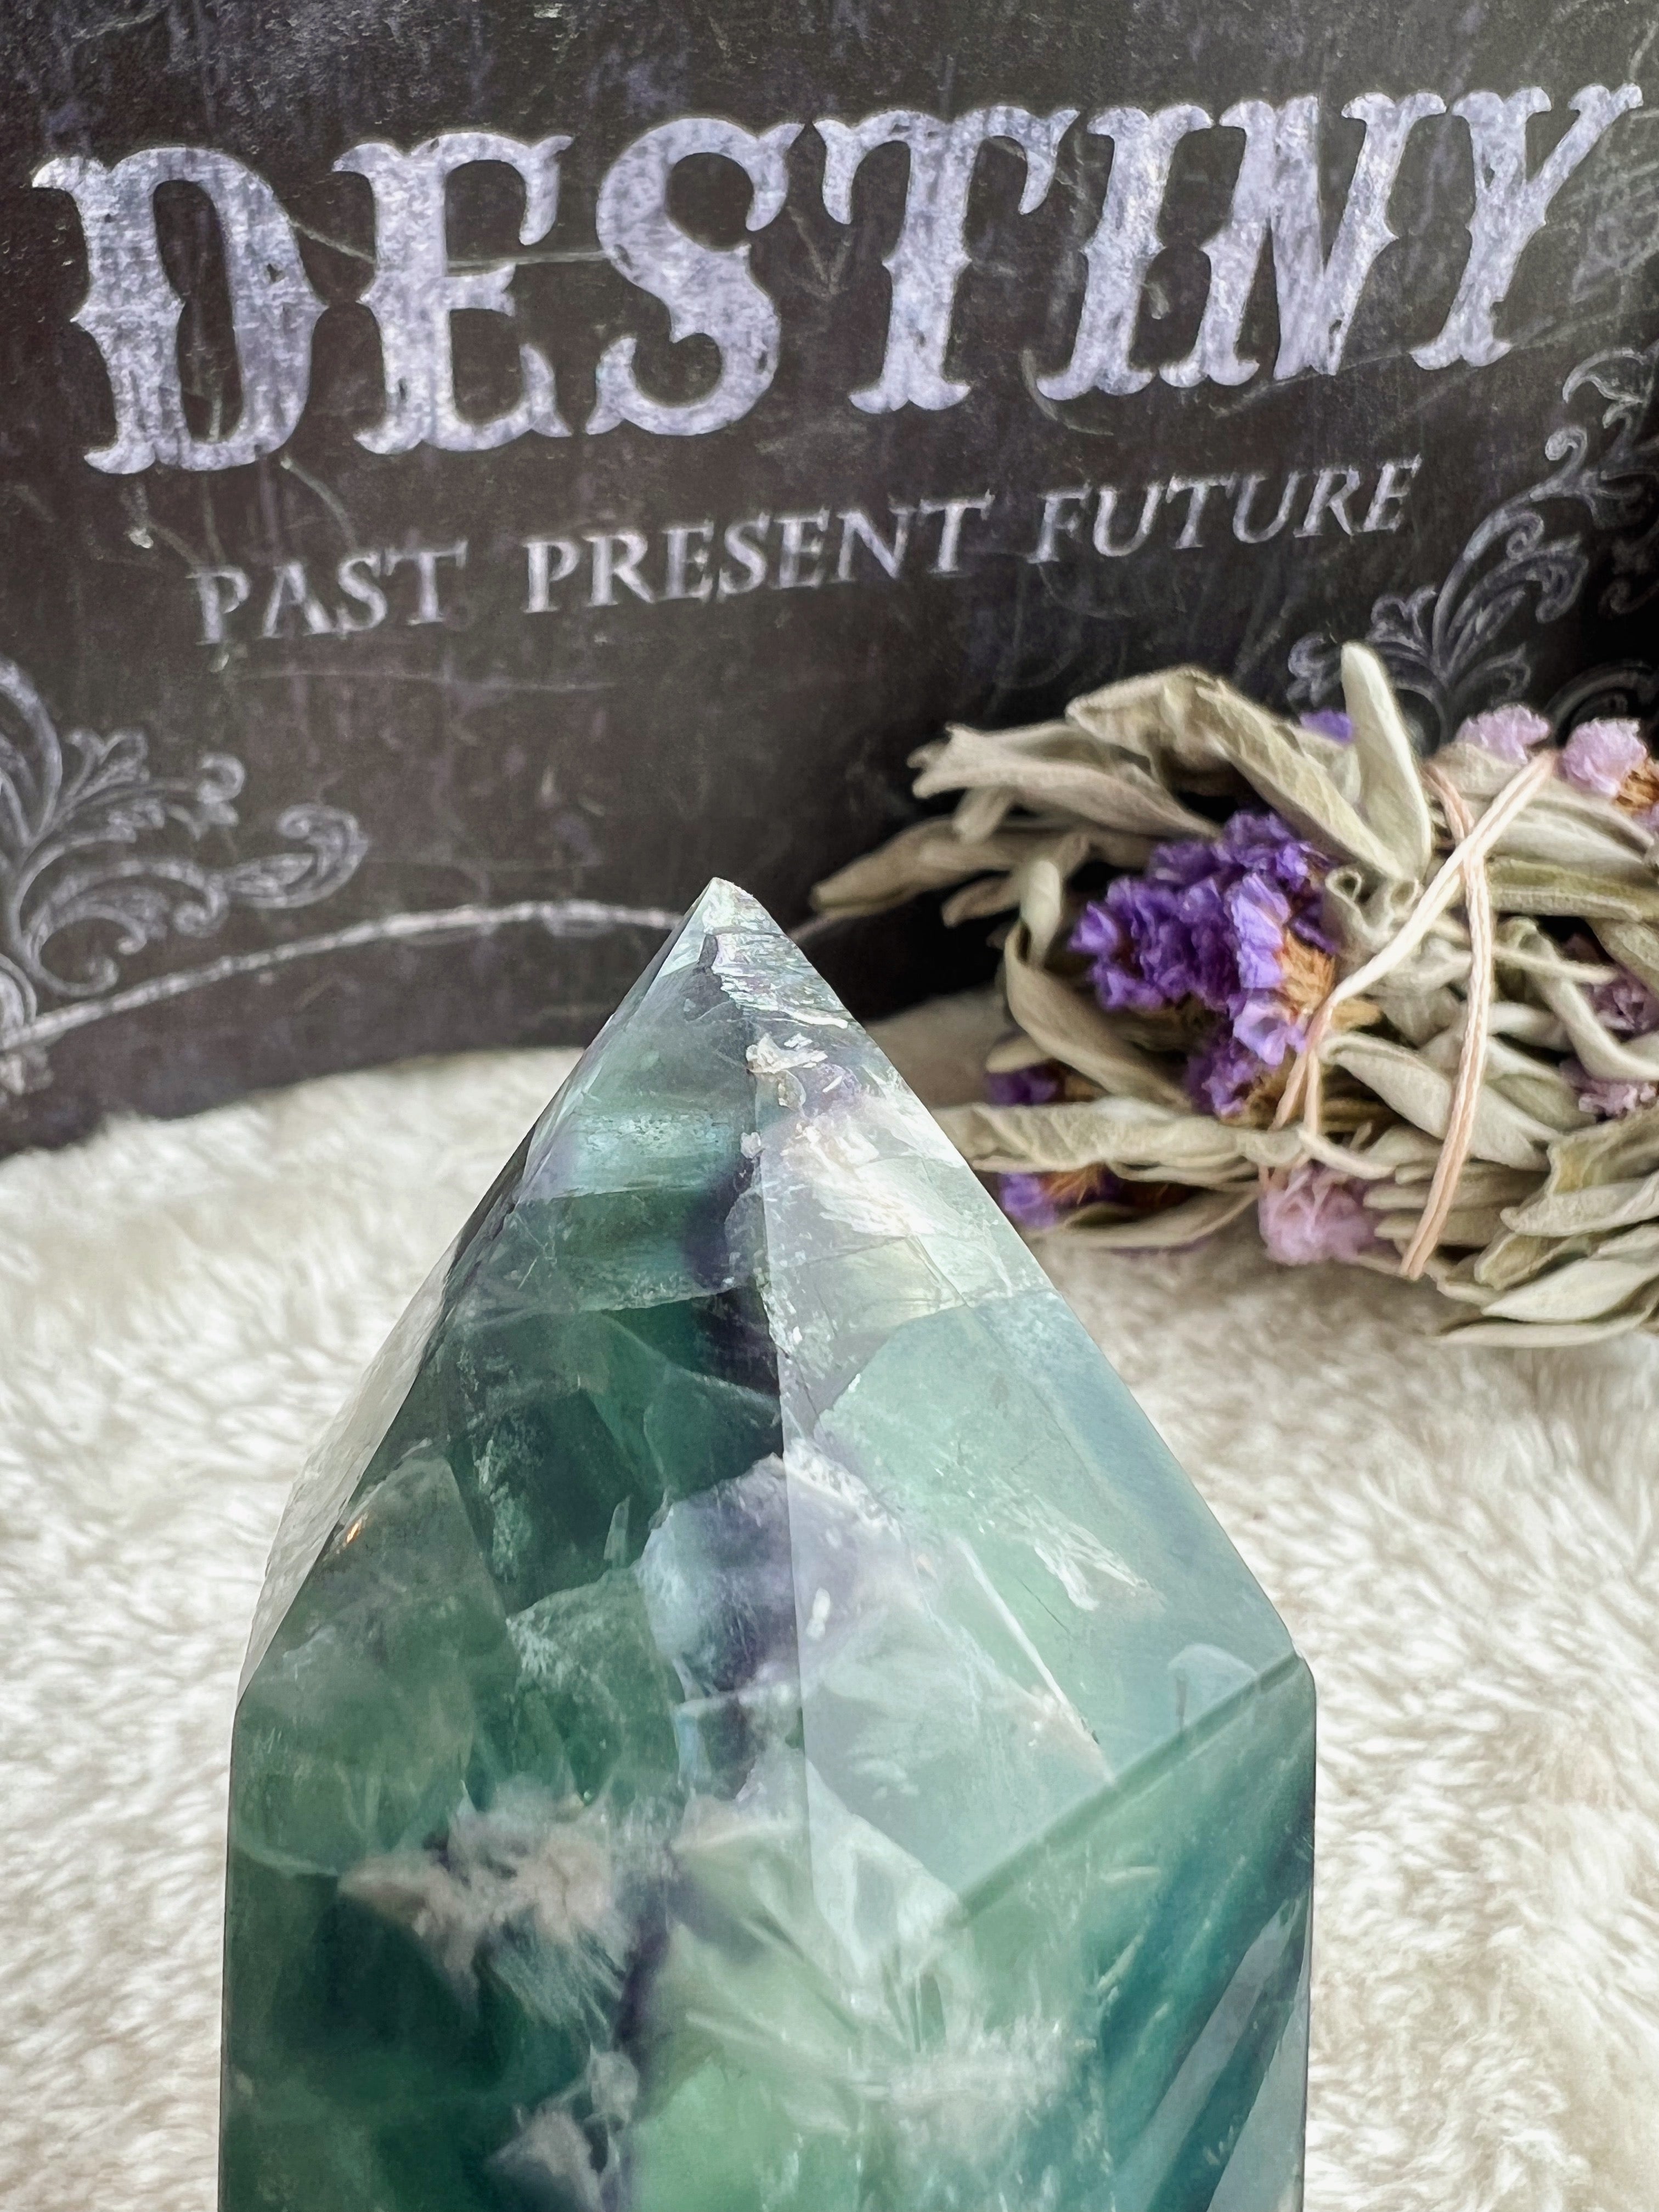 CHIPPED Fluorite with Calcite - Earthly Secrets